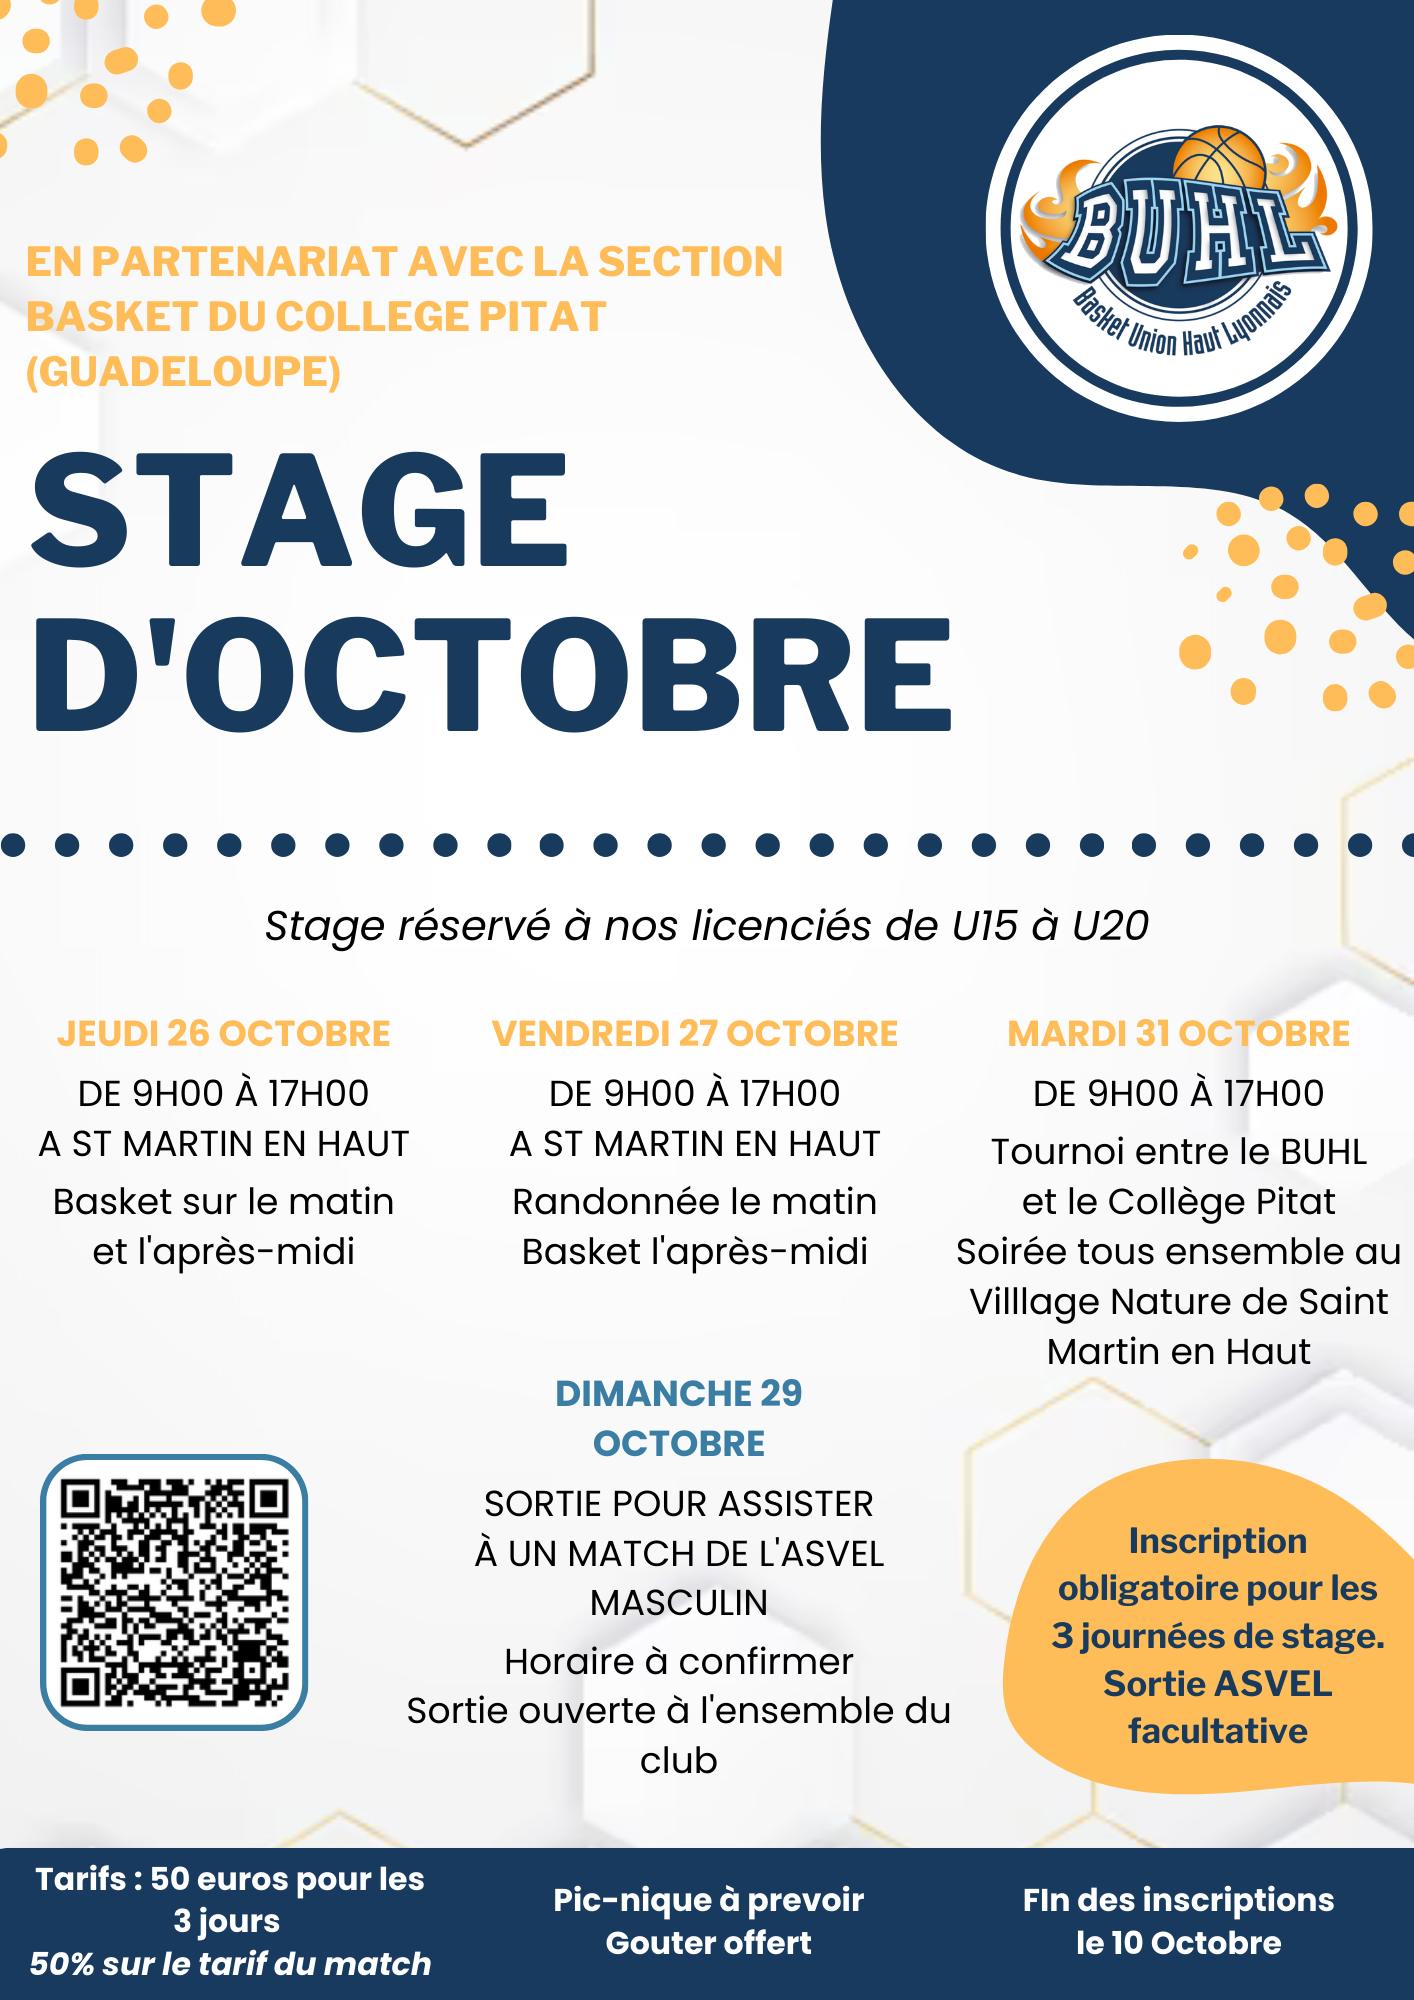 stage octobre - guadeloupe (3)